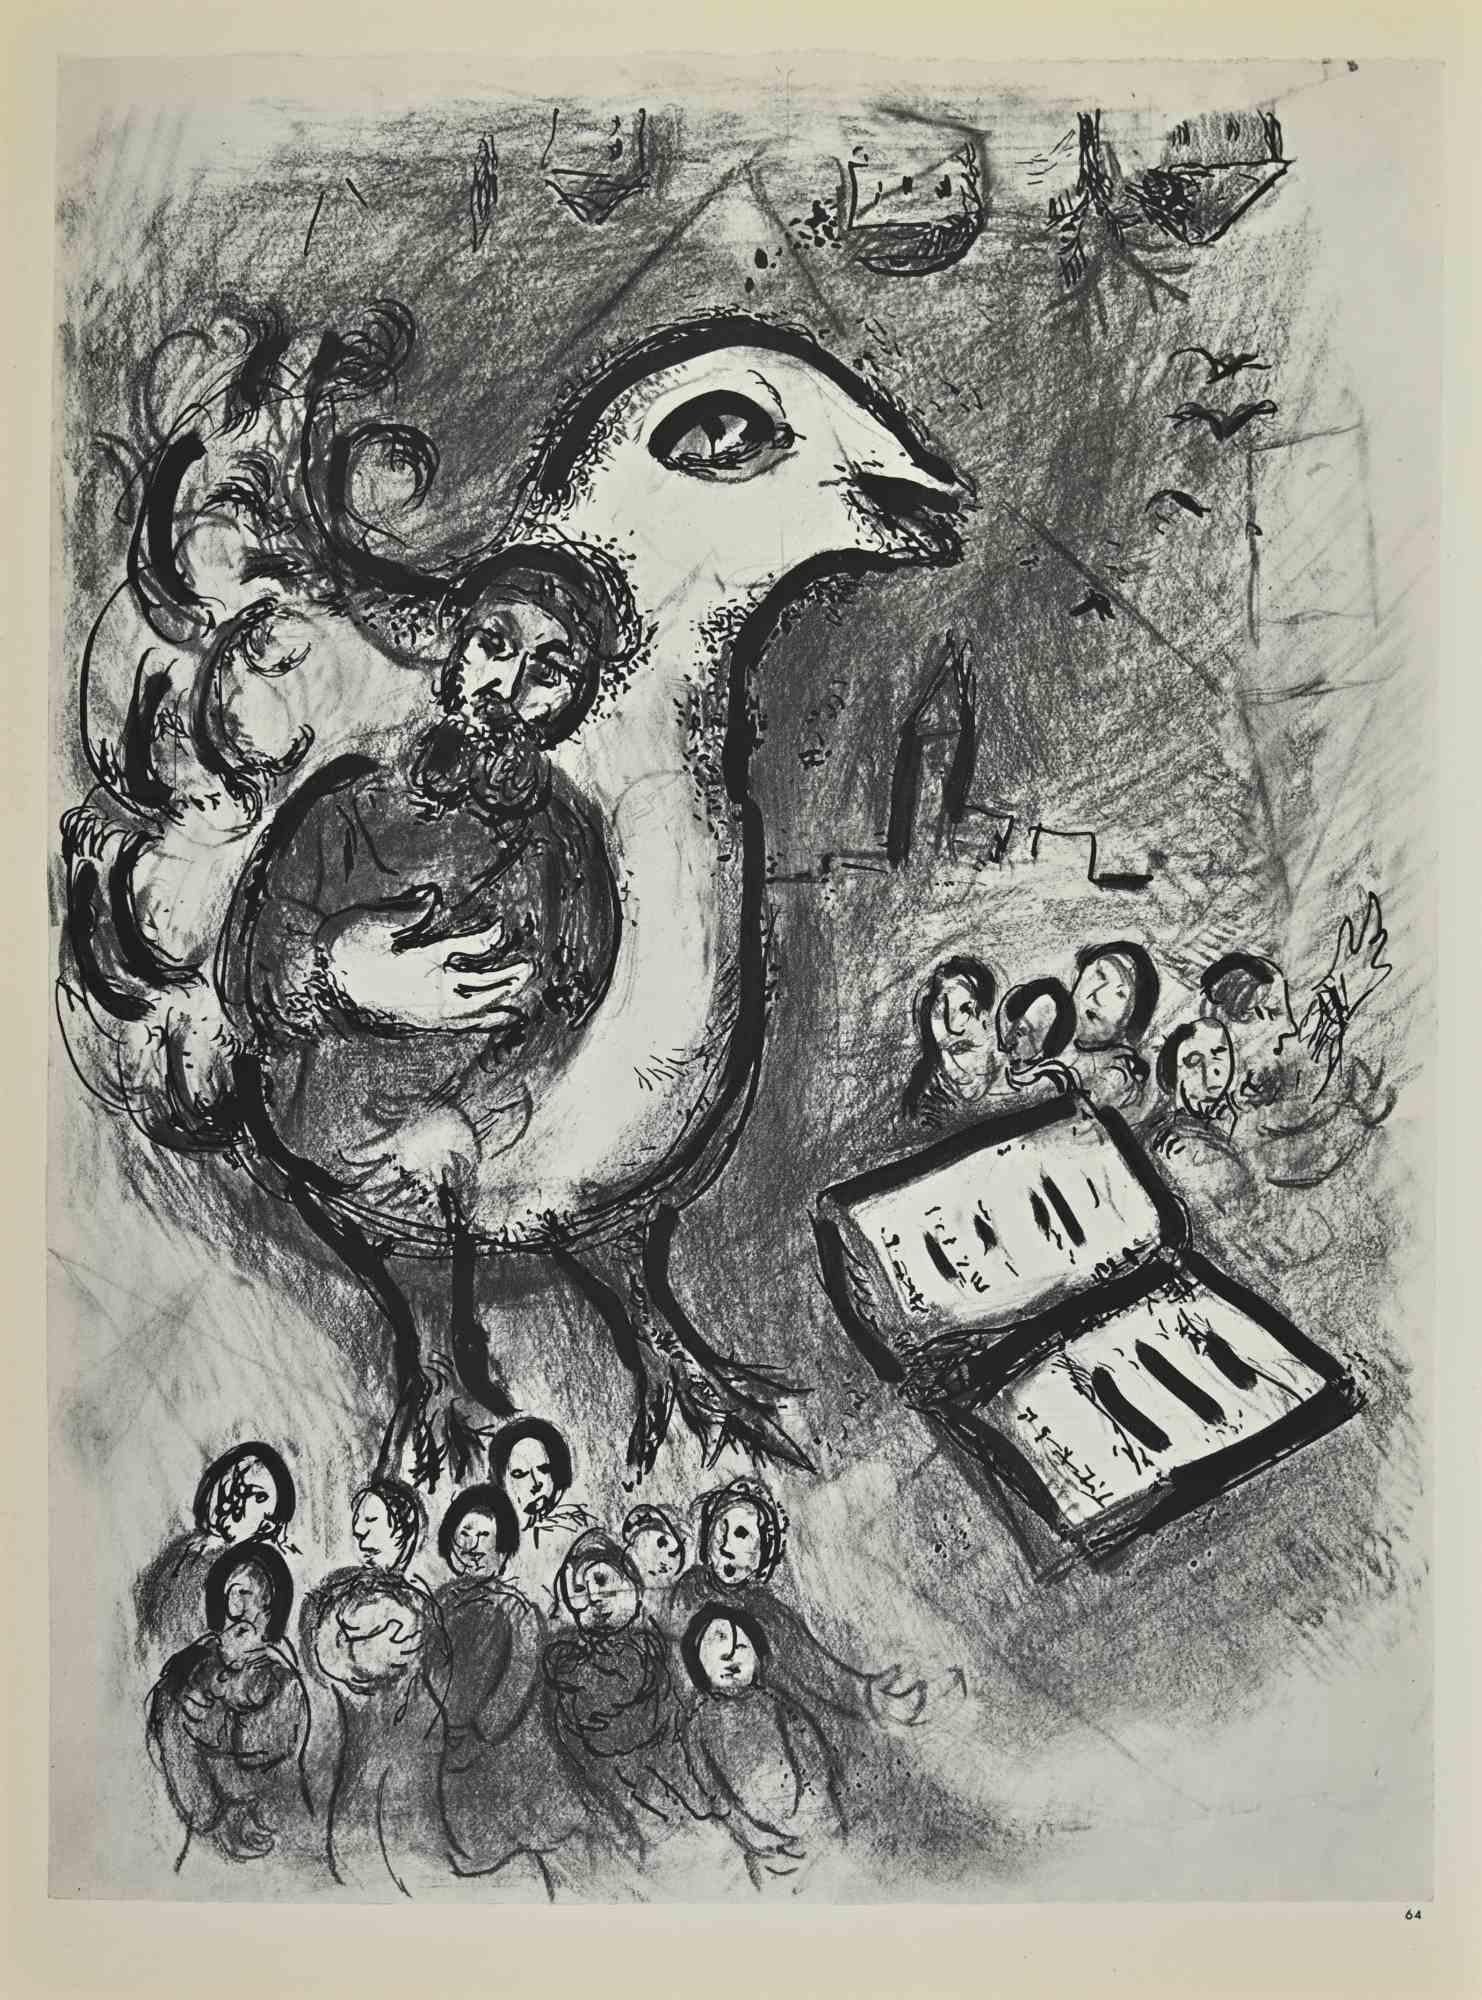 Psalm is an artwork realized by March Chagall, 1960s.

Lithograph on brown-toned paper, no signature.

Lithograph on both sheets.

Edition of 6500 unsigned lithographs. Printed by Mourlot and published by Tériade, Paris.

Ref. Mourlot, F., Chagall